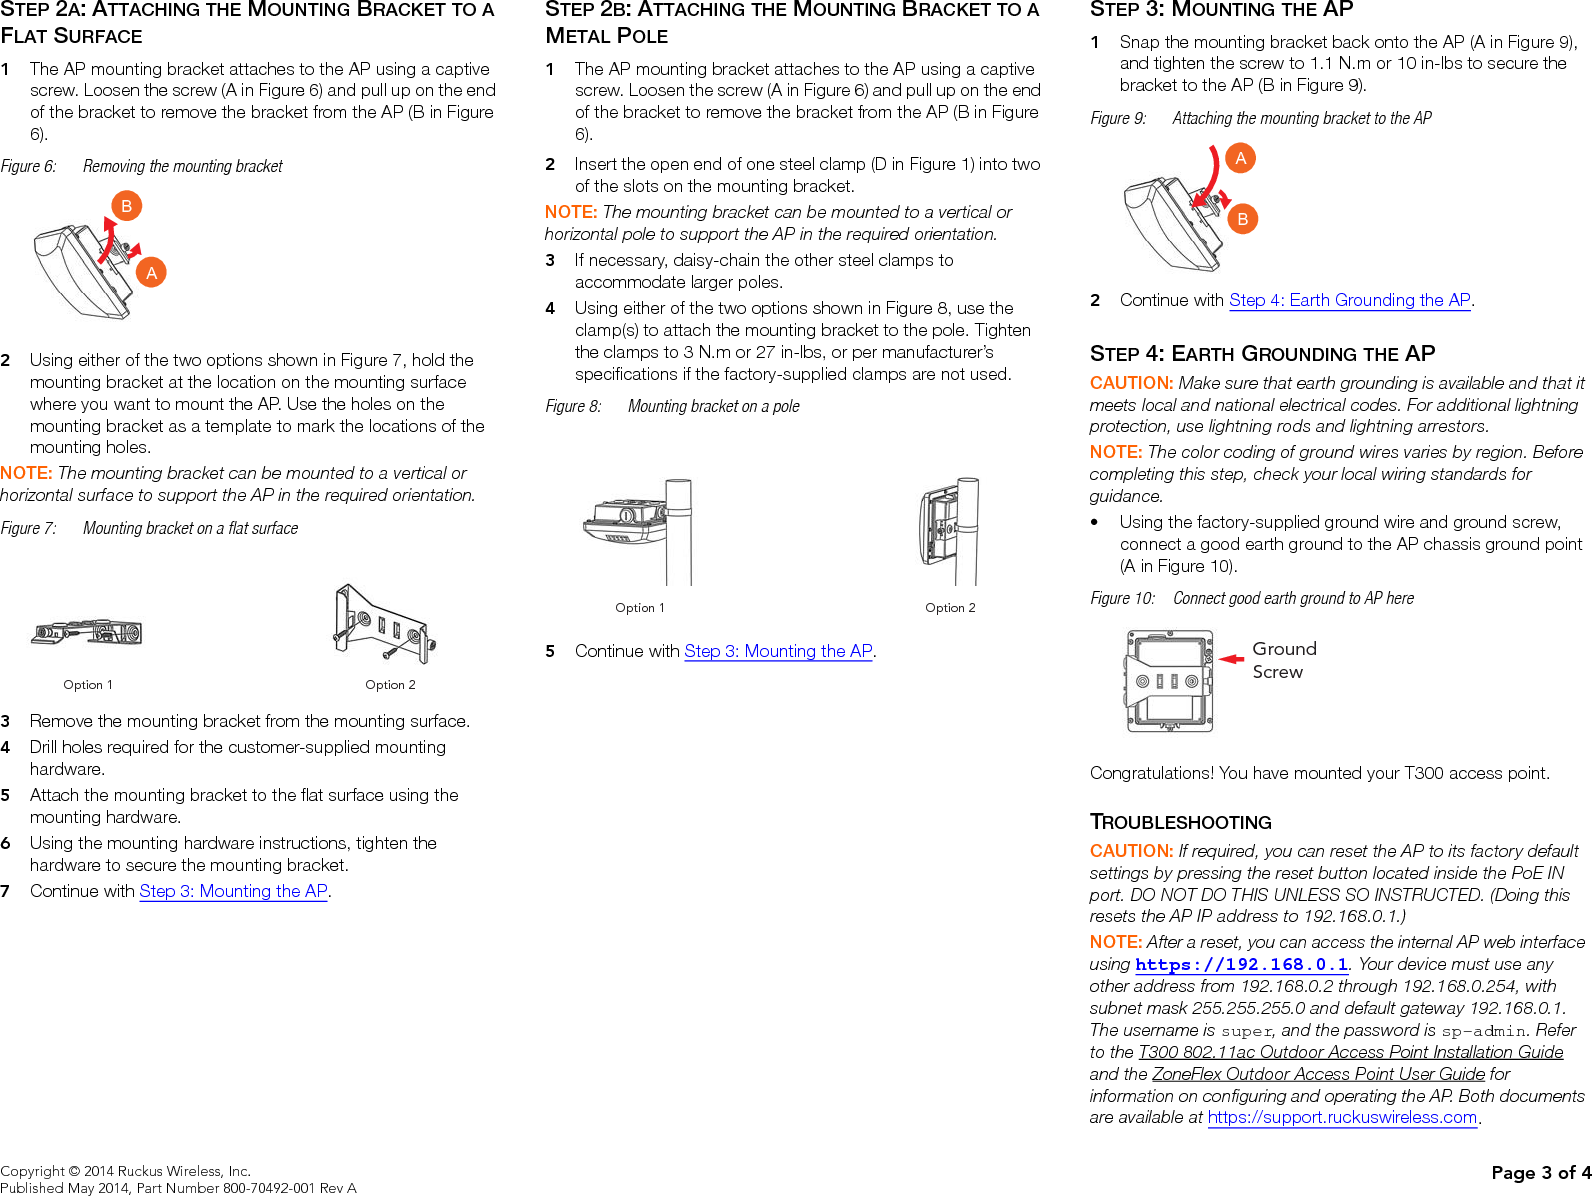 Copyright © 2014 Ruckus Wireless, Inc.Published May 2014, Part Number 800-70492-001 Rev A Page 4 of 4